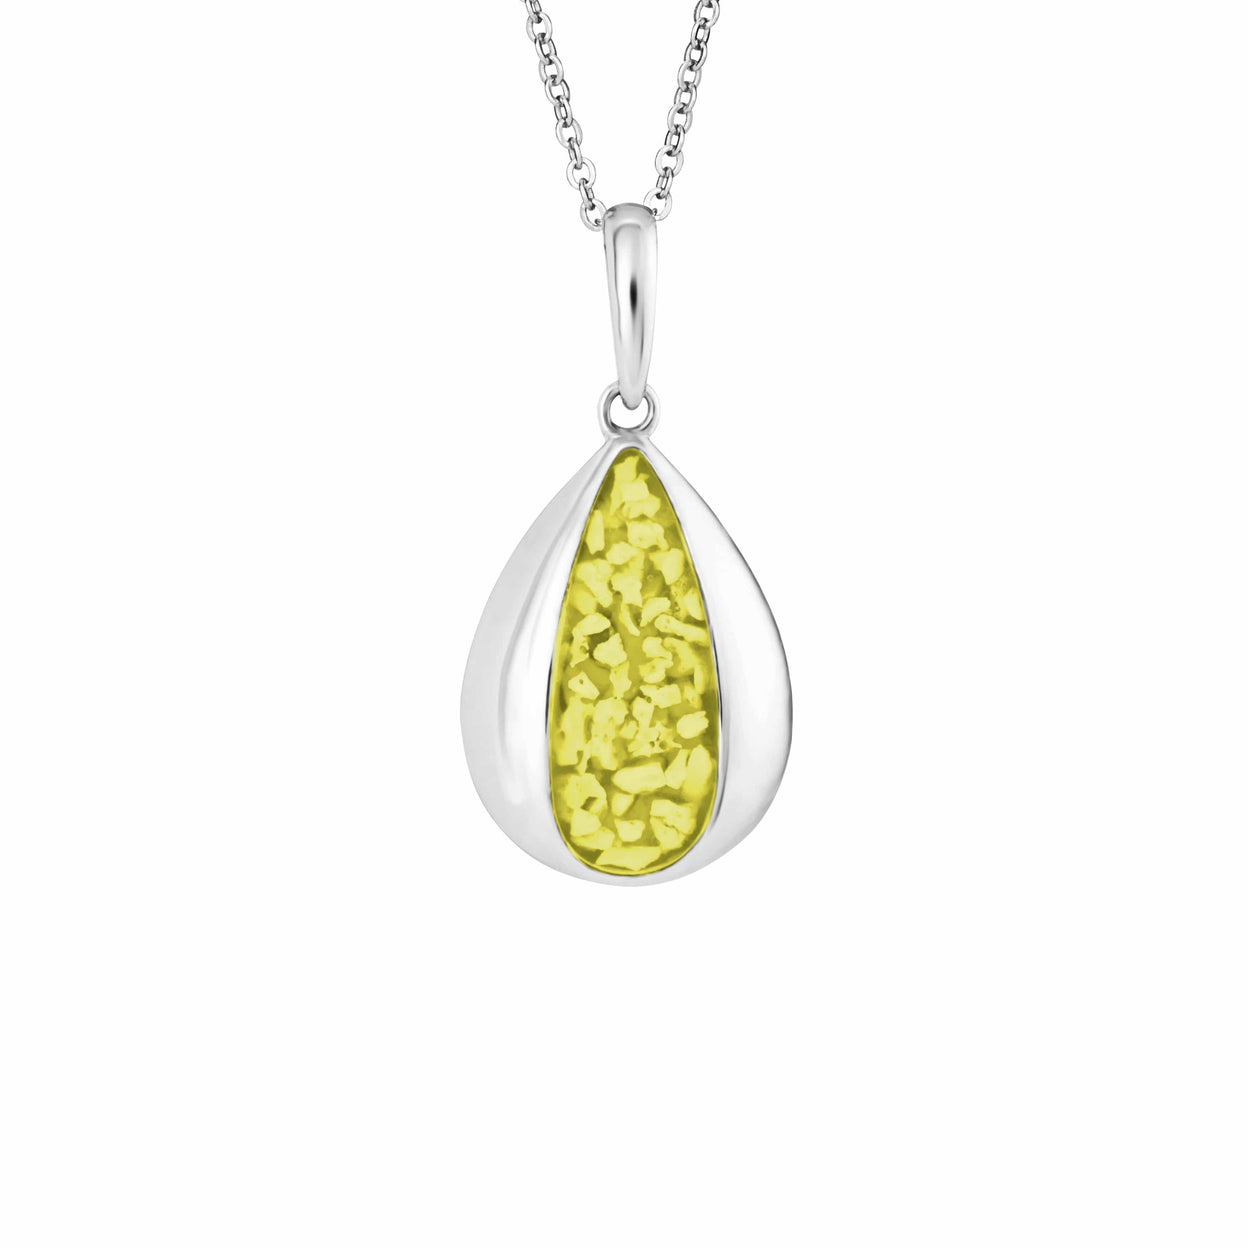 Load image into Gallery viewer, EverWith Ladies Rondure Teardrop Memorial Ashes Pendant